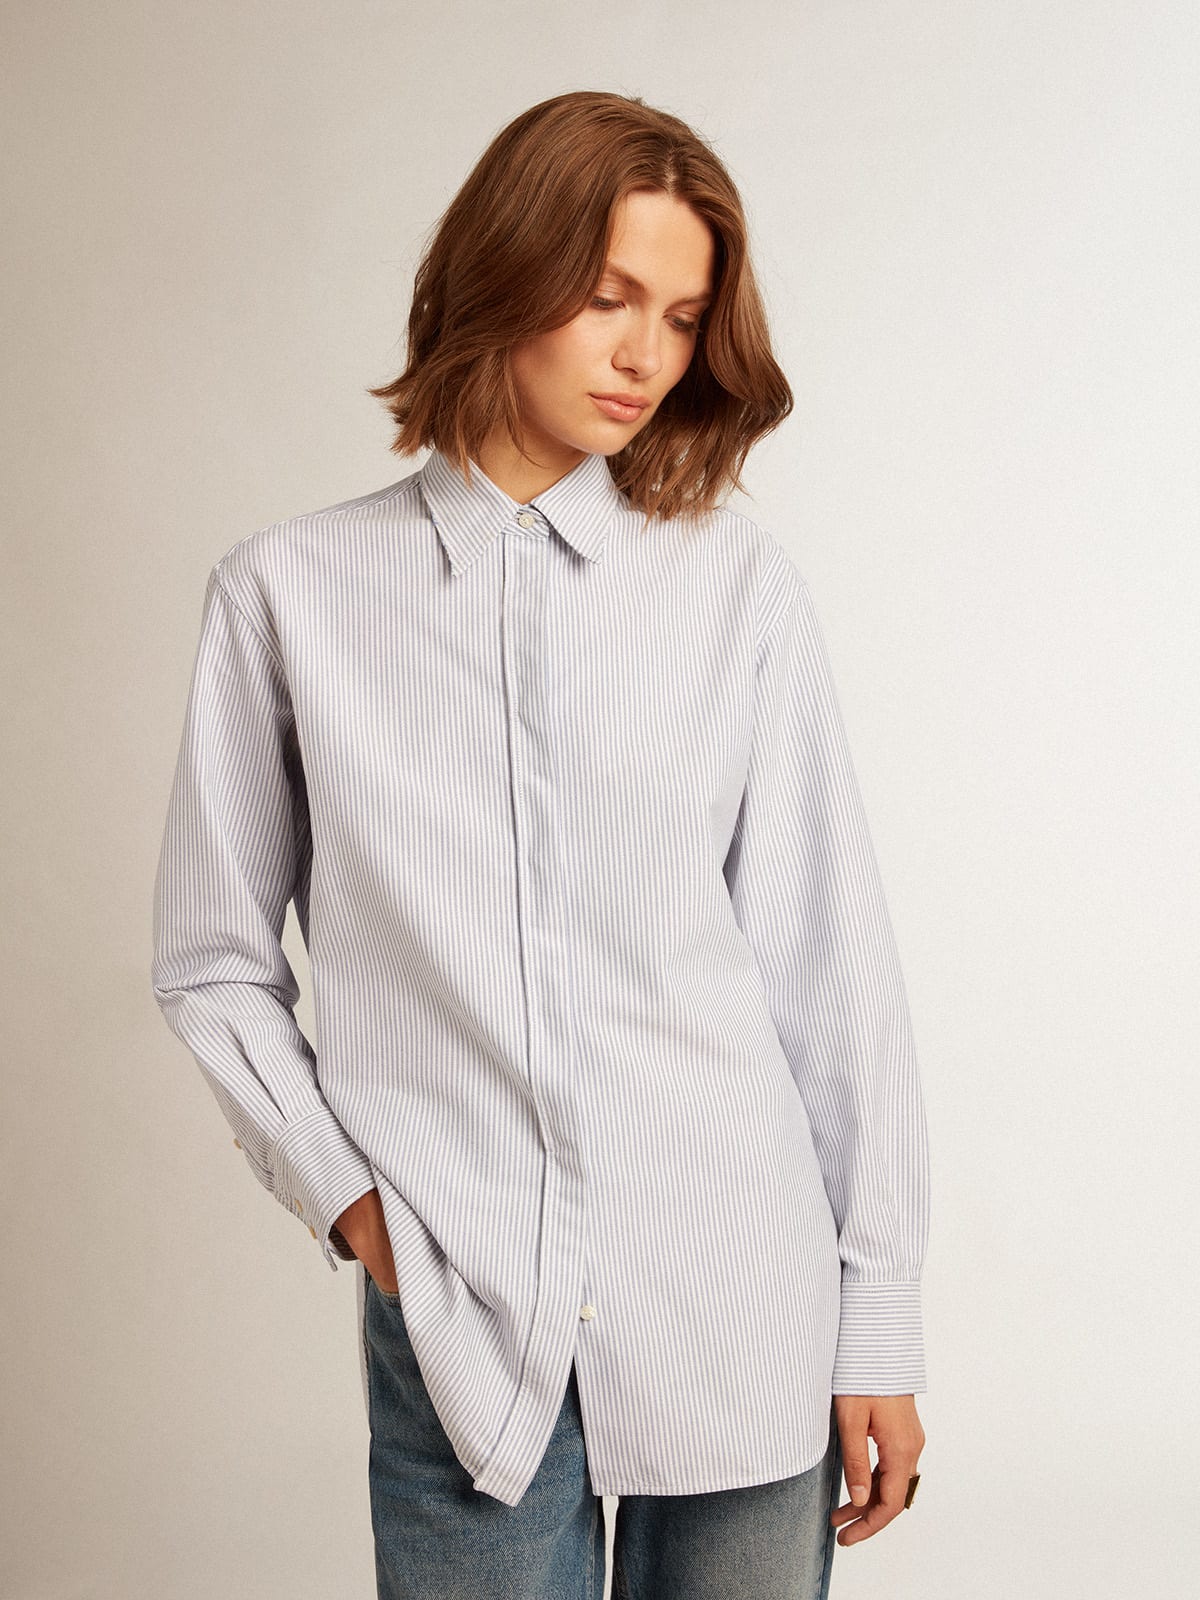 Golden Goose - Women's shirt with narrow stripes in 